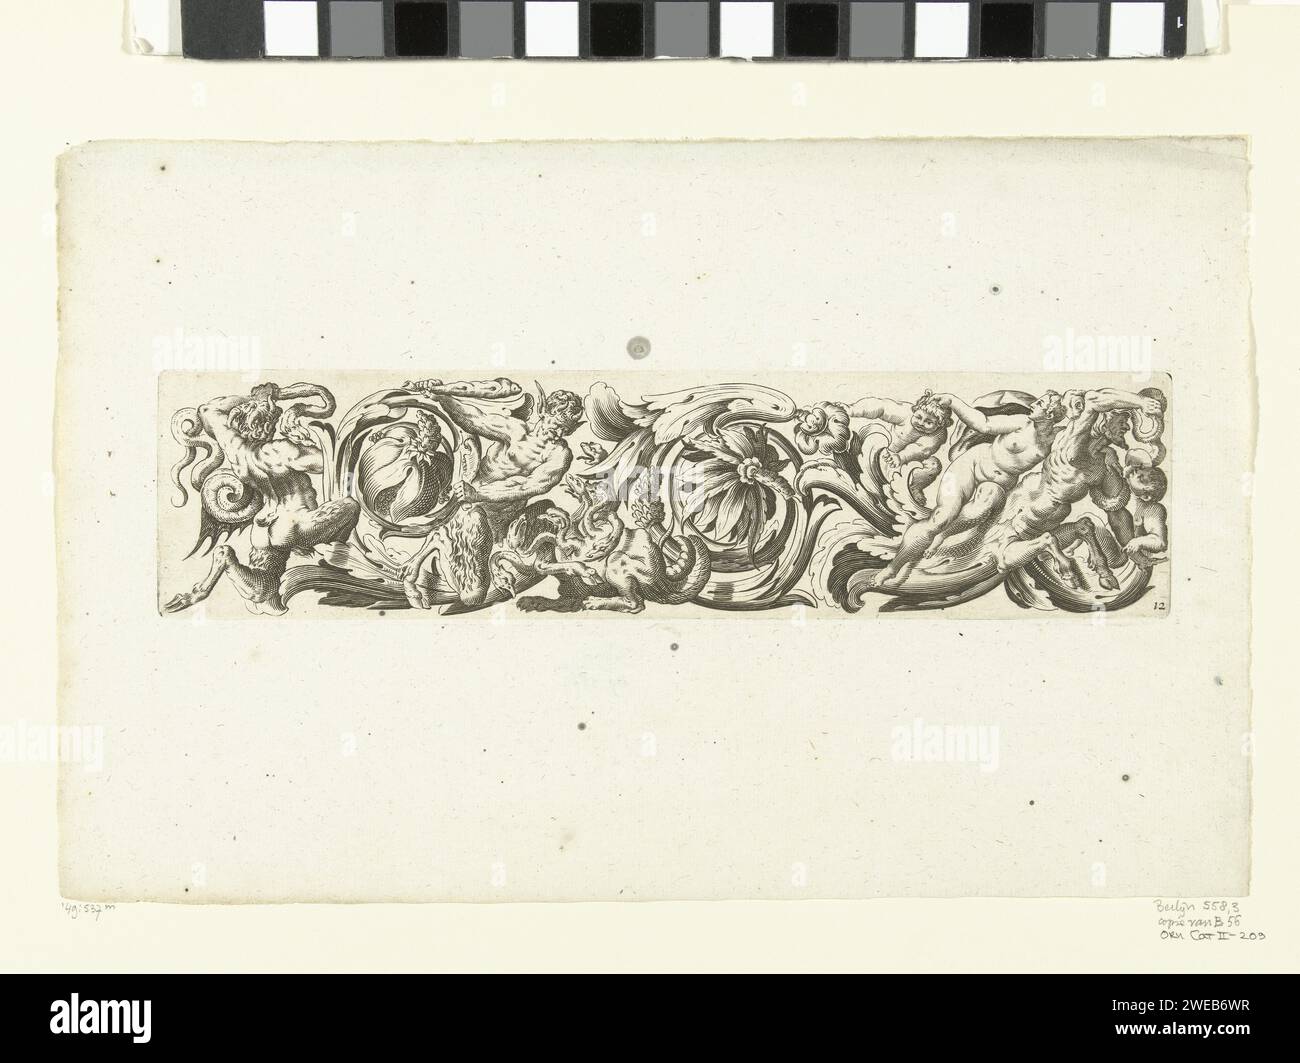 Leaf vank with flowers and many -headed monster in the middle, after 1680 - Before 1706 print On the left fights a satap with a snake. Leaf 12 from series with Dutch opposite reduced copies of the Disegnii Varii di Polifilo Zancarli series. print maker: Netherlands (possibly)after design by: Italy (possibly)publisher: Amsterdam paper engraving Stock Photo